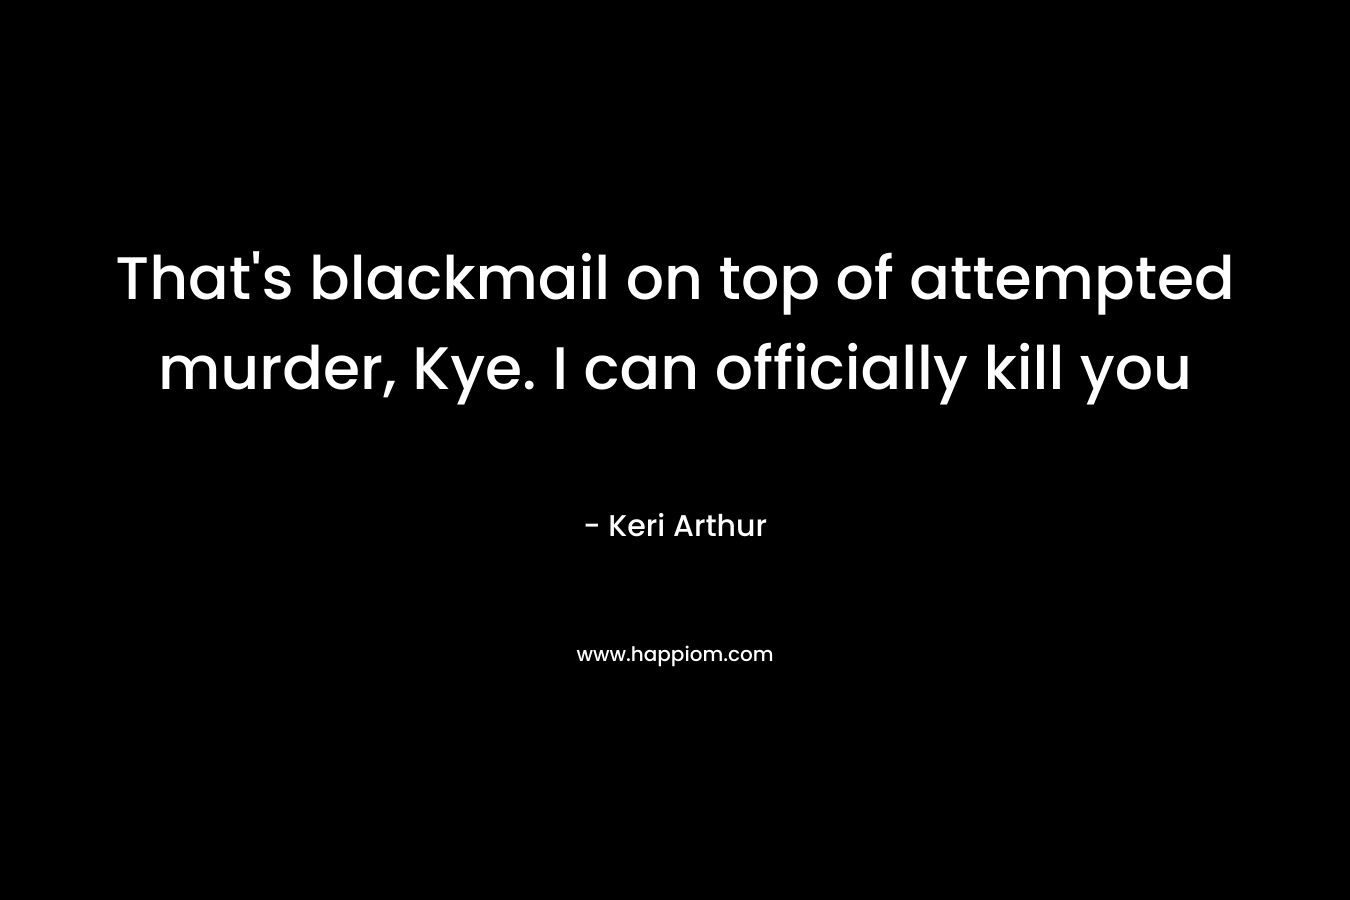 That’s blackmail on top of attempted murder, Kye. I can officially kill you – Keri Arthur